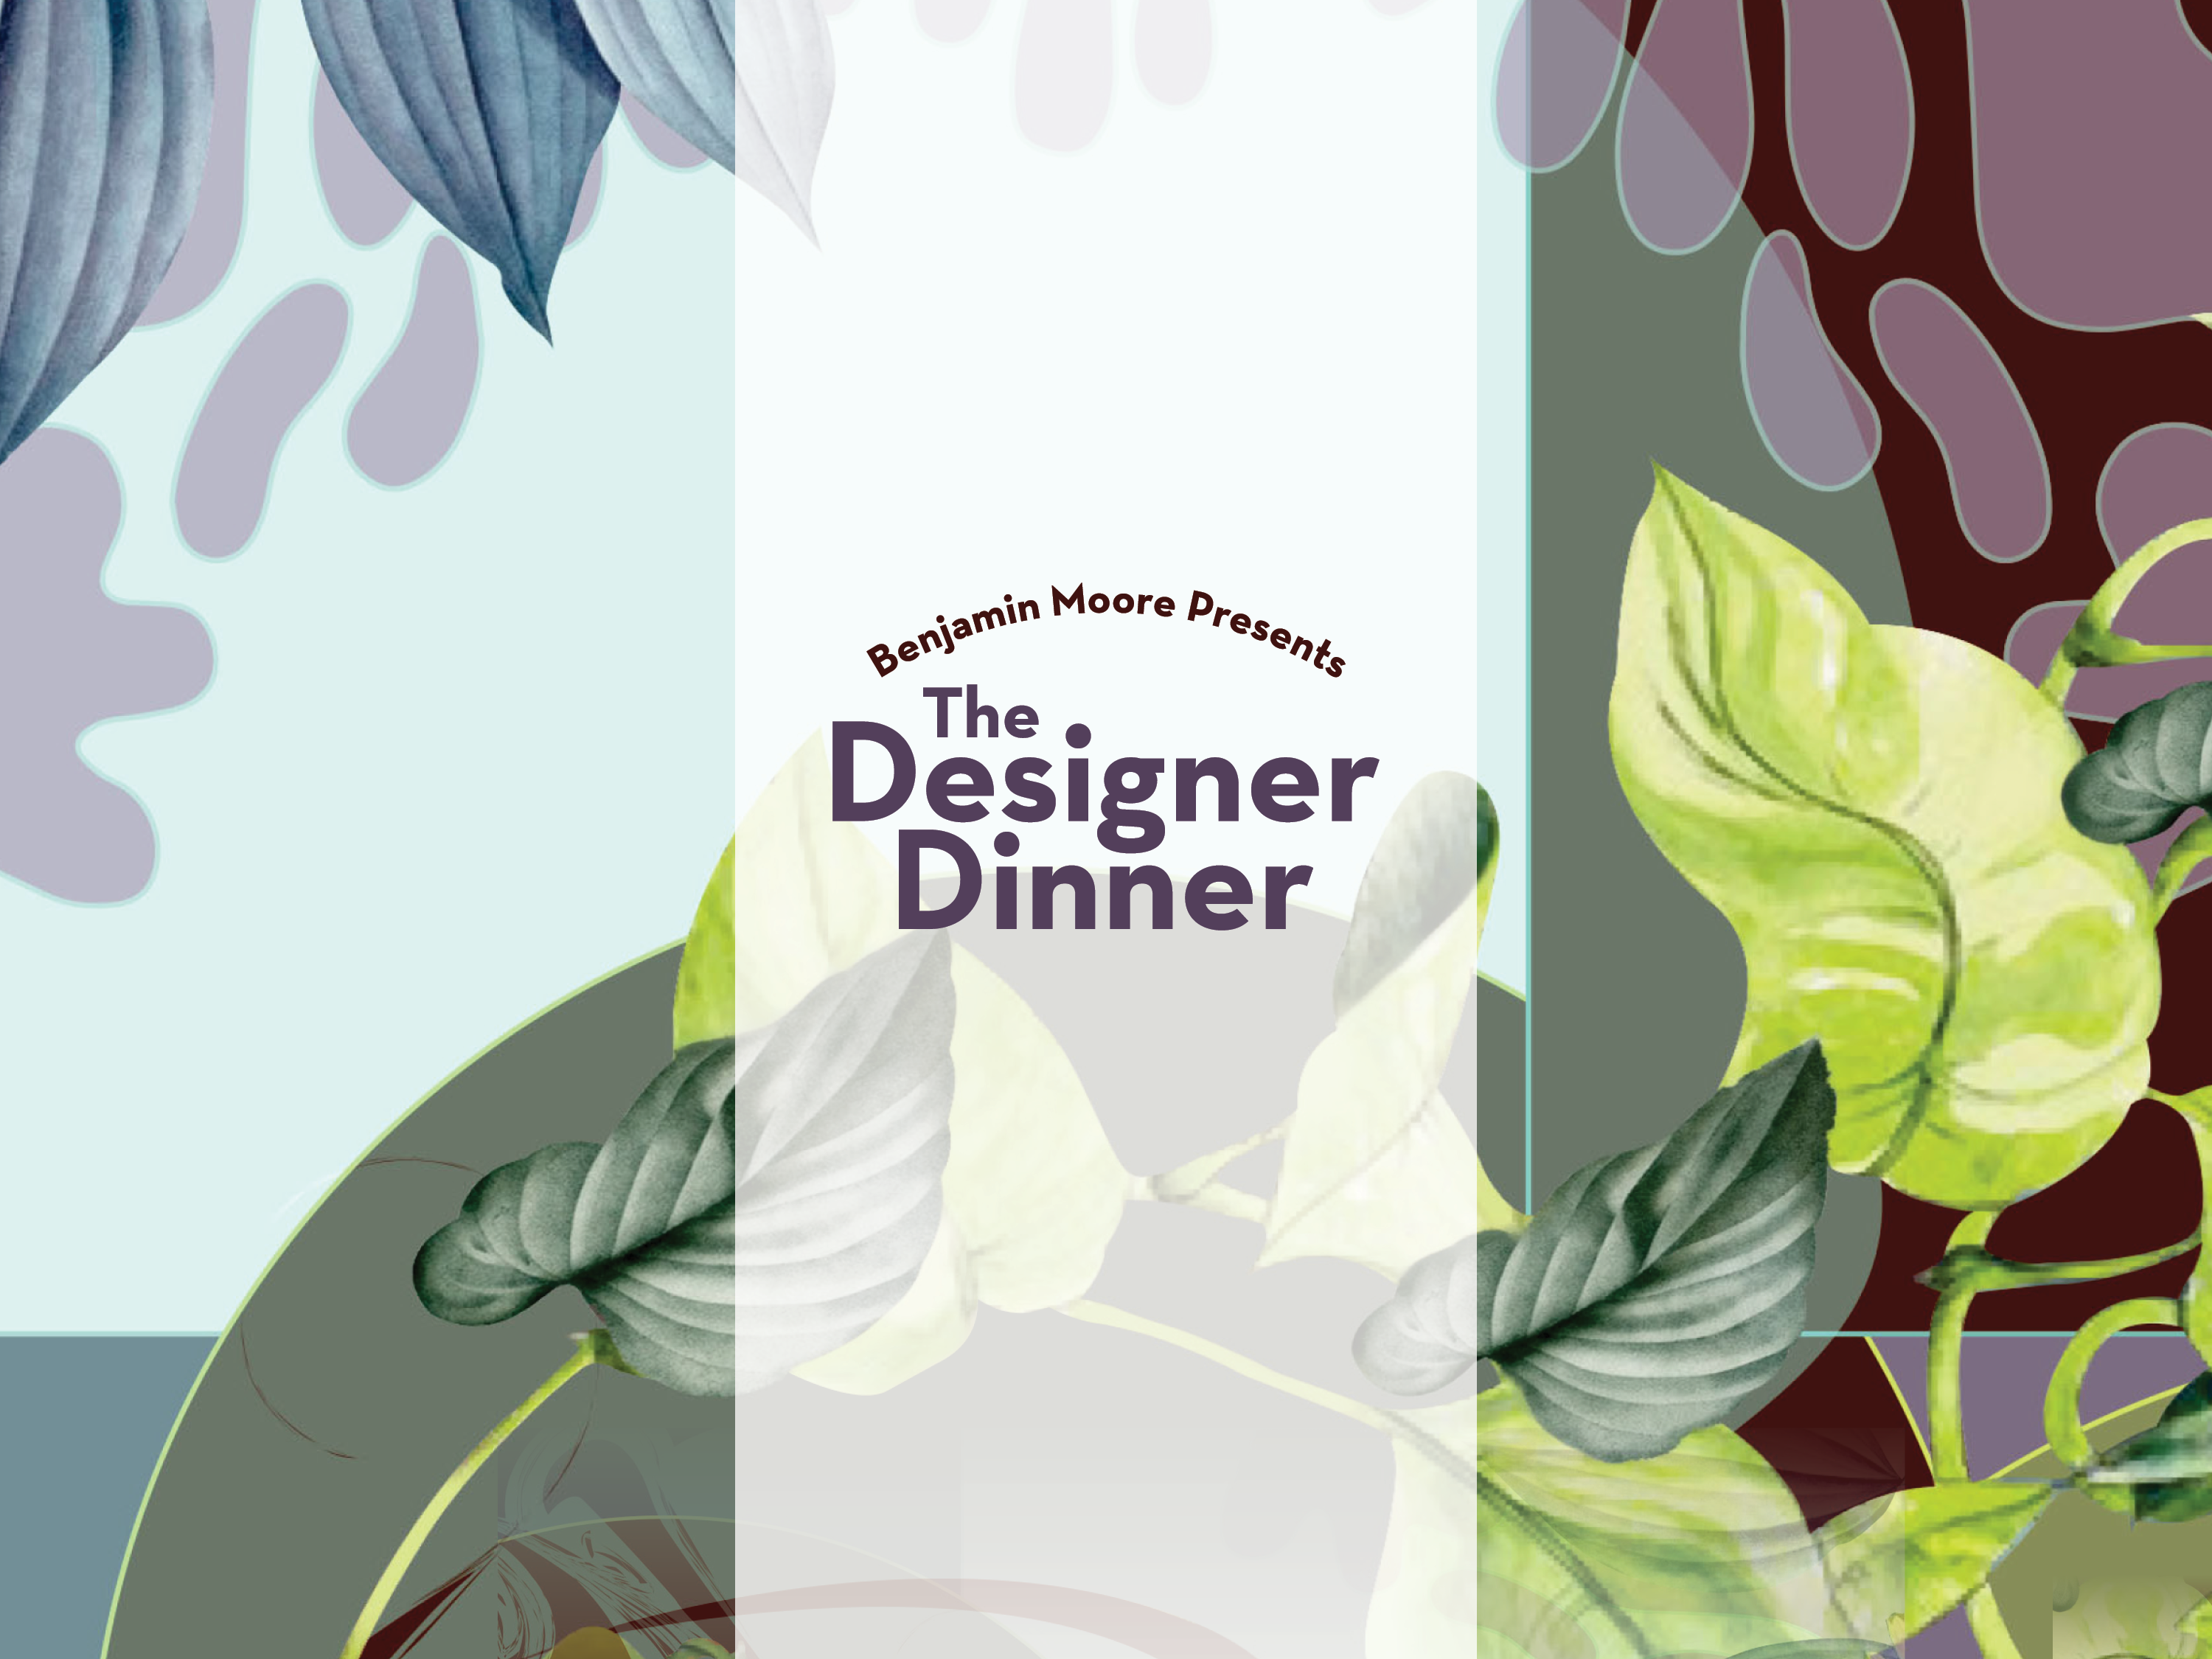 Benjamin Moore Presents the Designer Dinner with Special Guests Designer Suzanne Kasler and Architect Bobby McAlpine